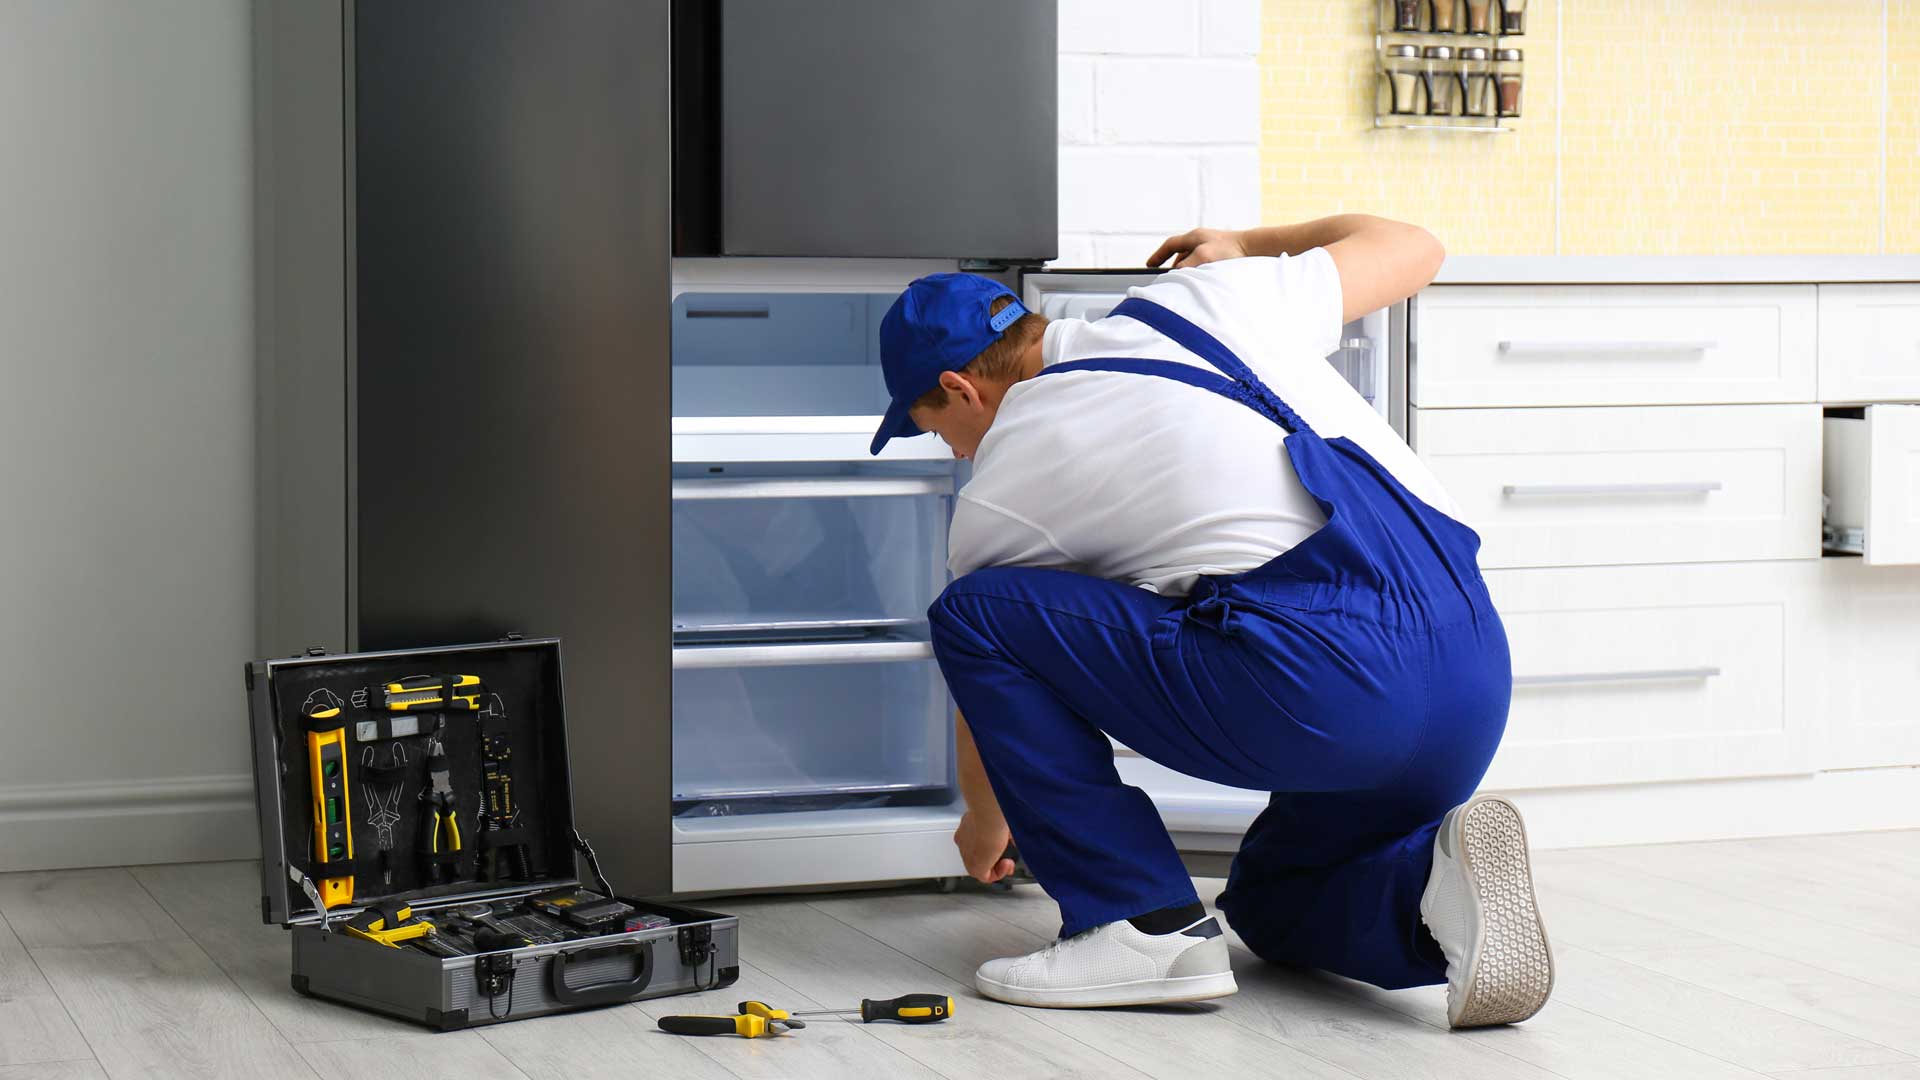 An appliance repair man kneeling to inspect the freezer drawer of a refrigerator